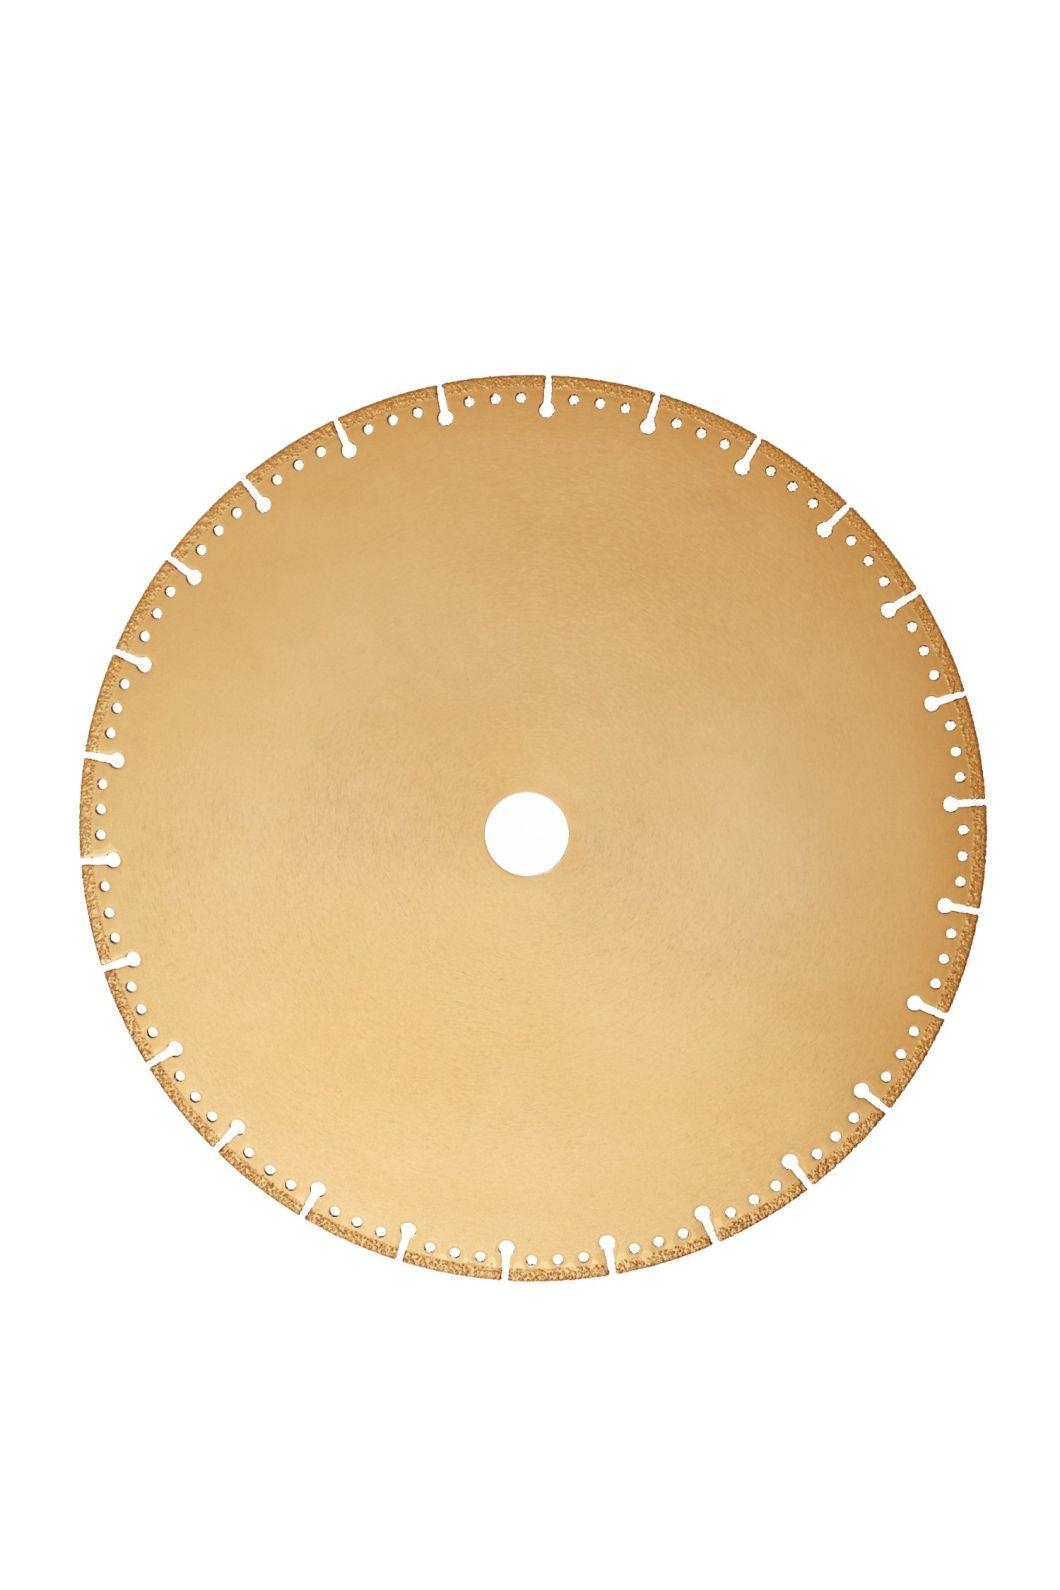 Taa Brand 4inch-16inch Diamond Cutting and Grinding Disc Saw Blade Steel Pipe and Casting Cutting